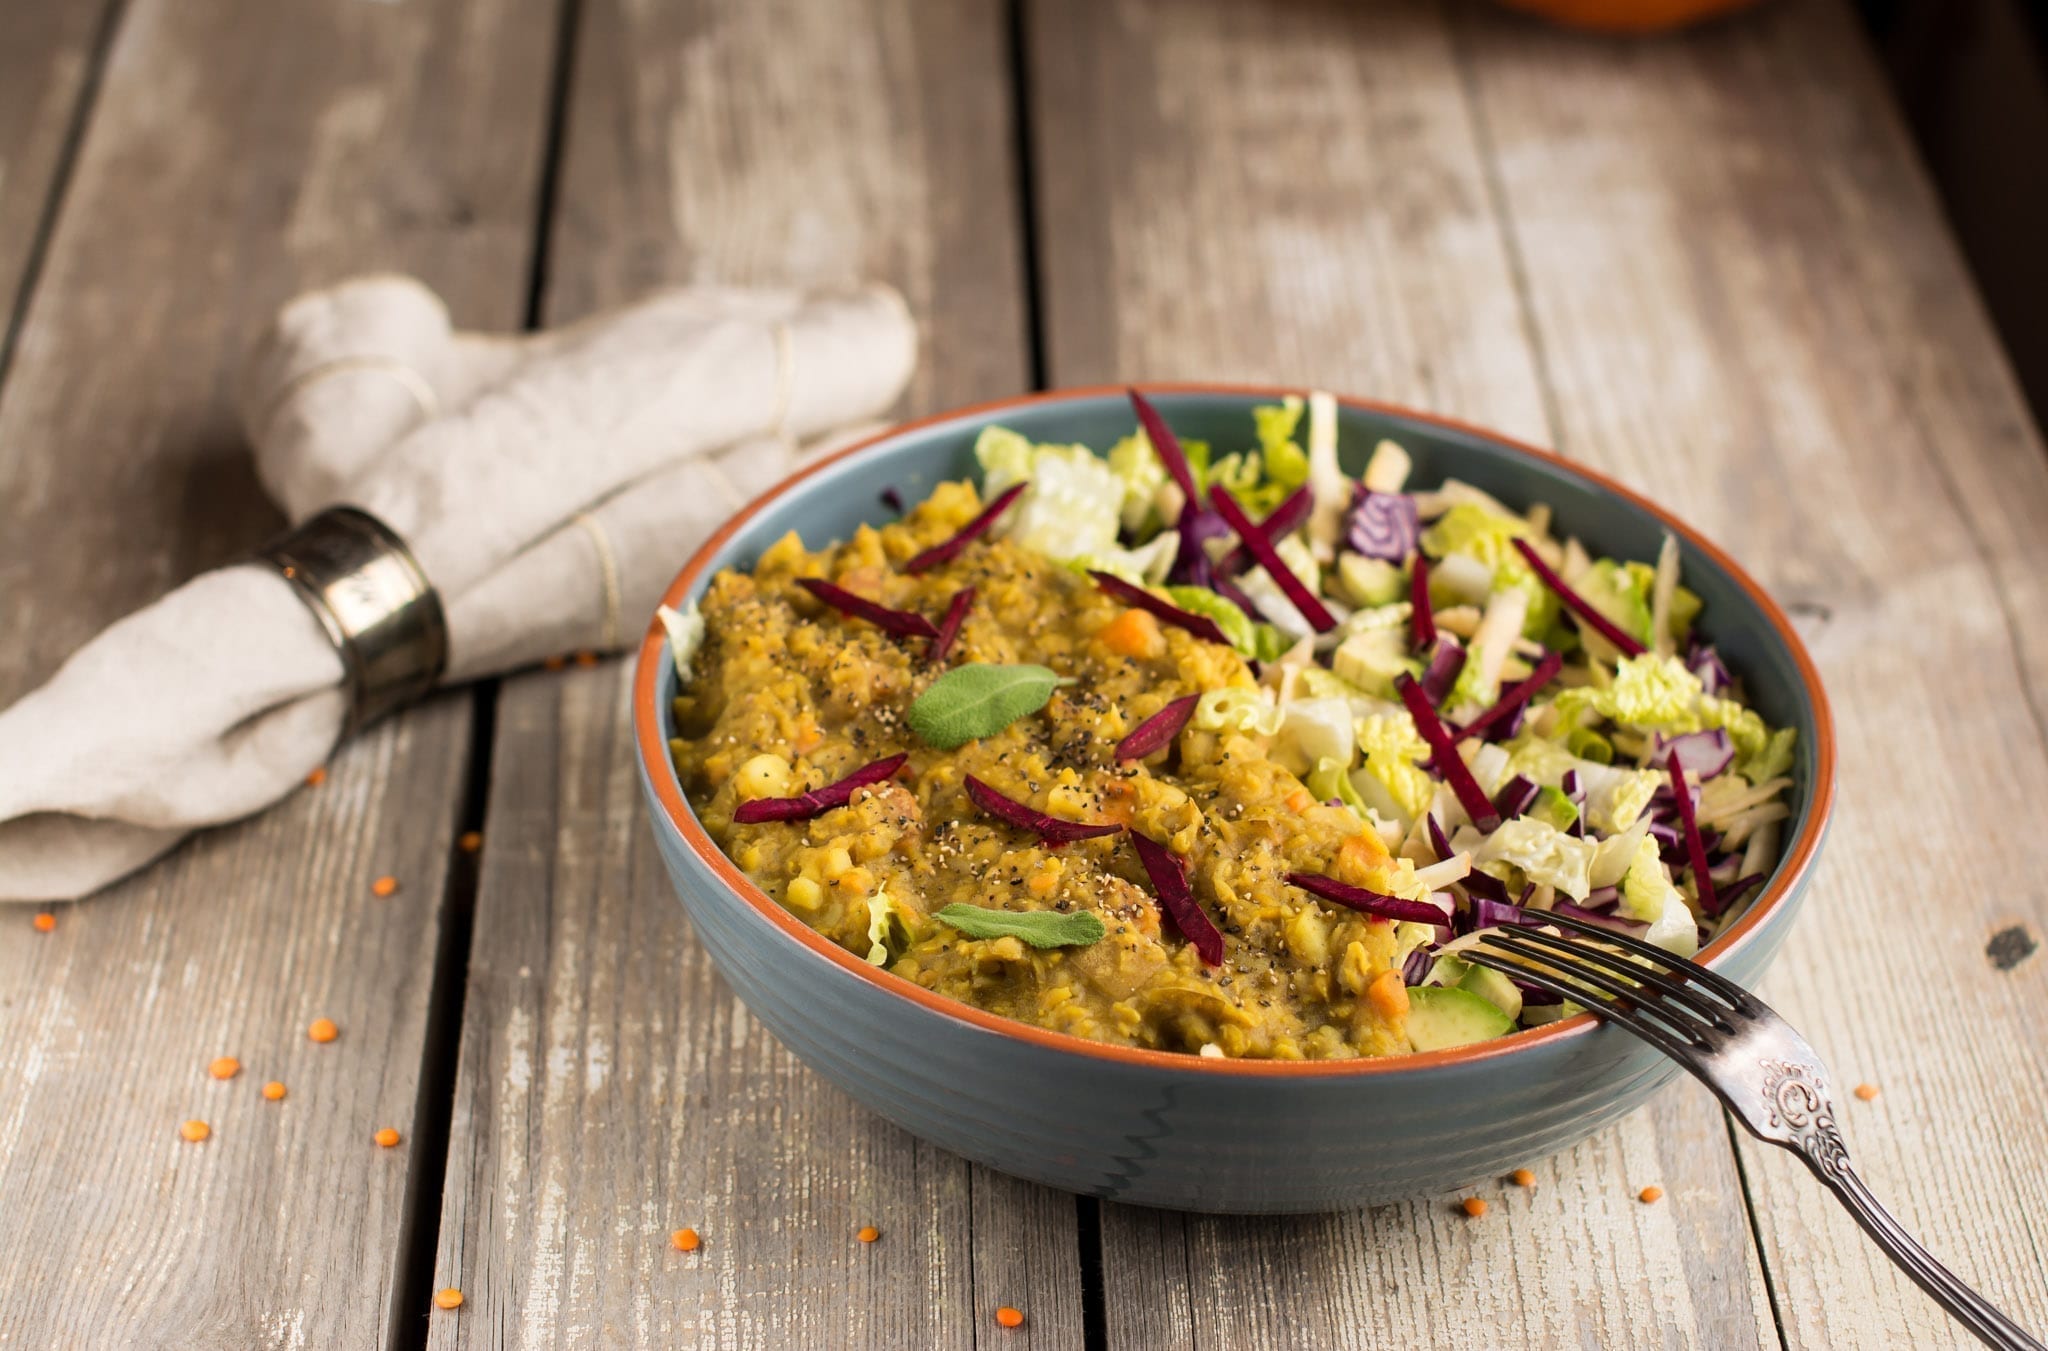 Salad with Red Lentil Dhal